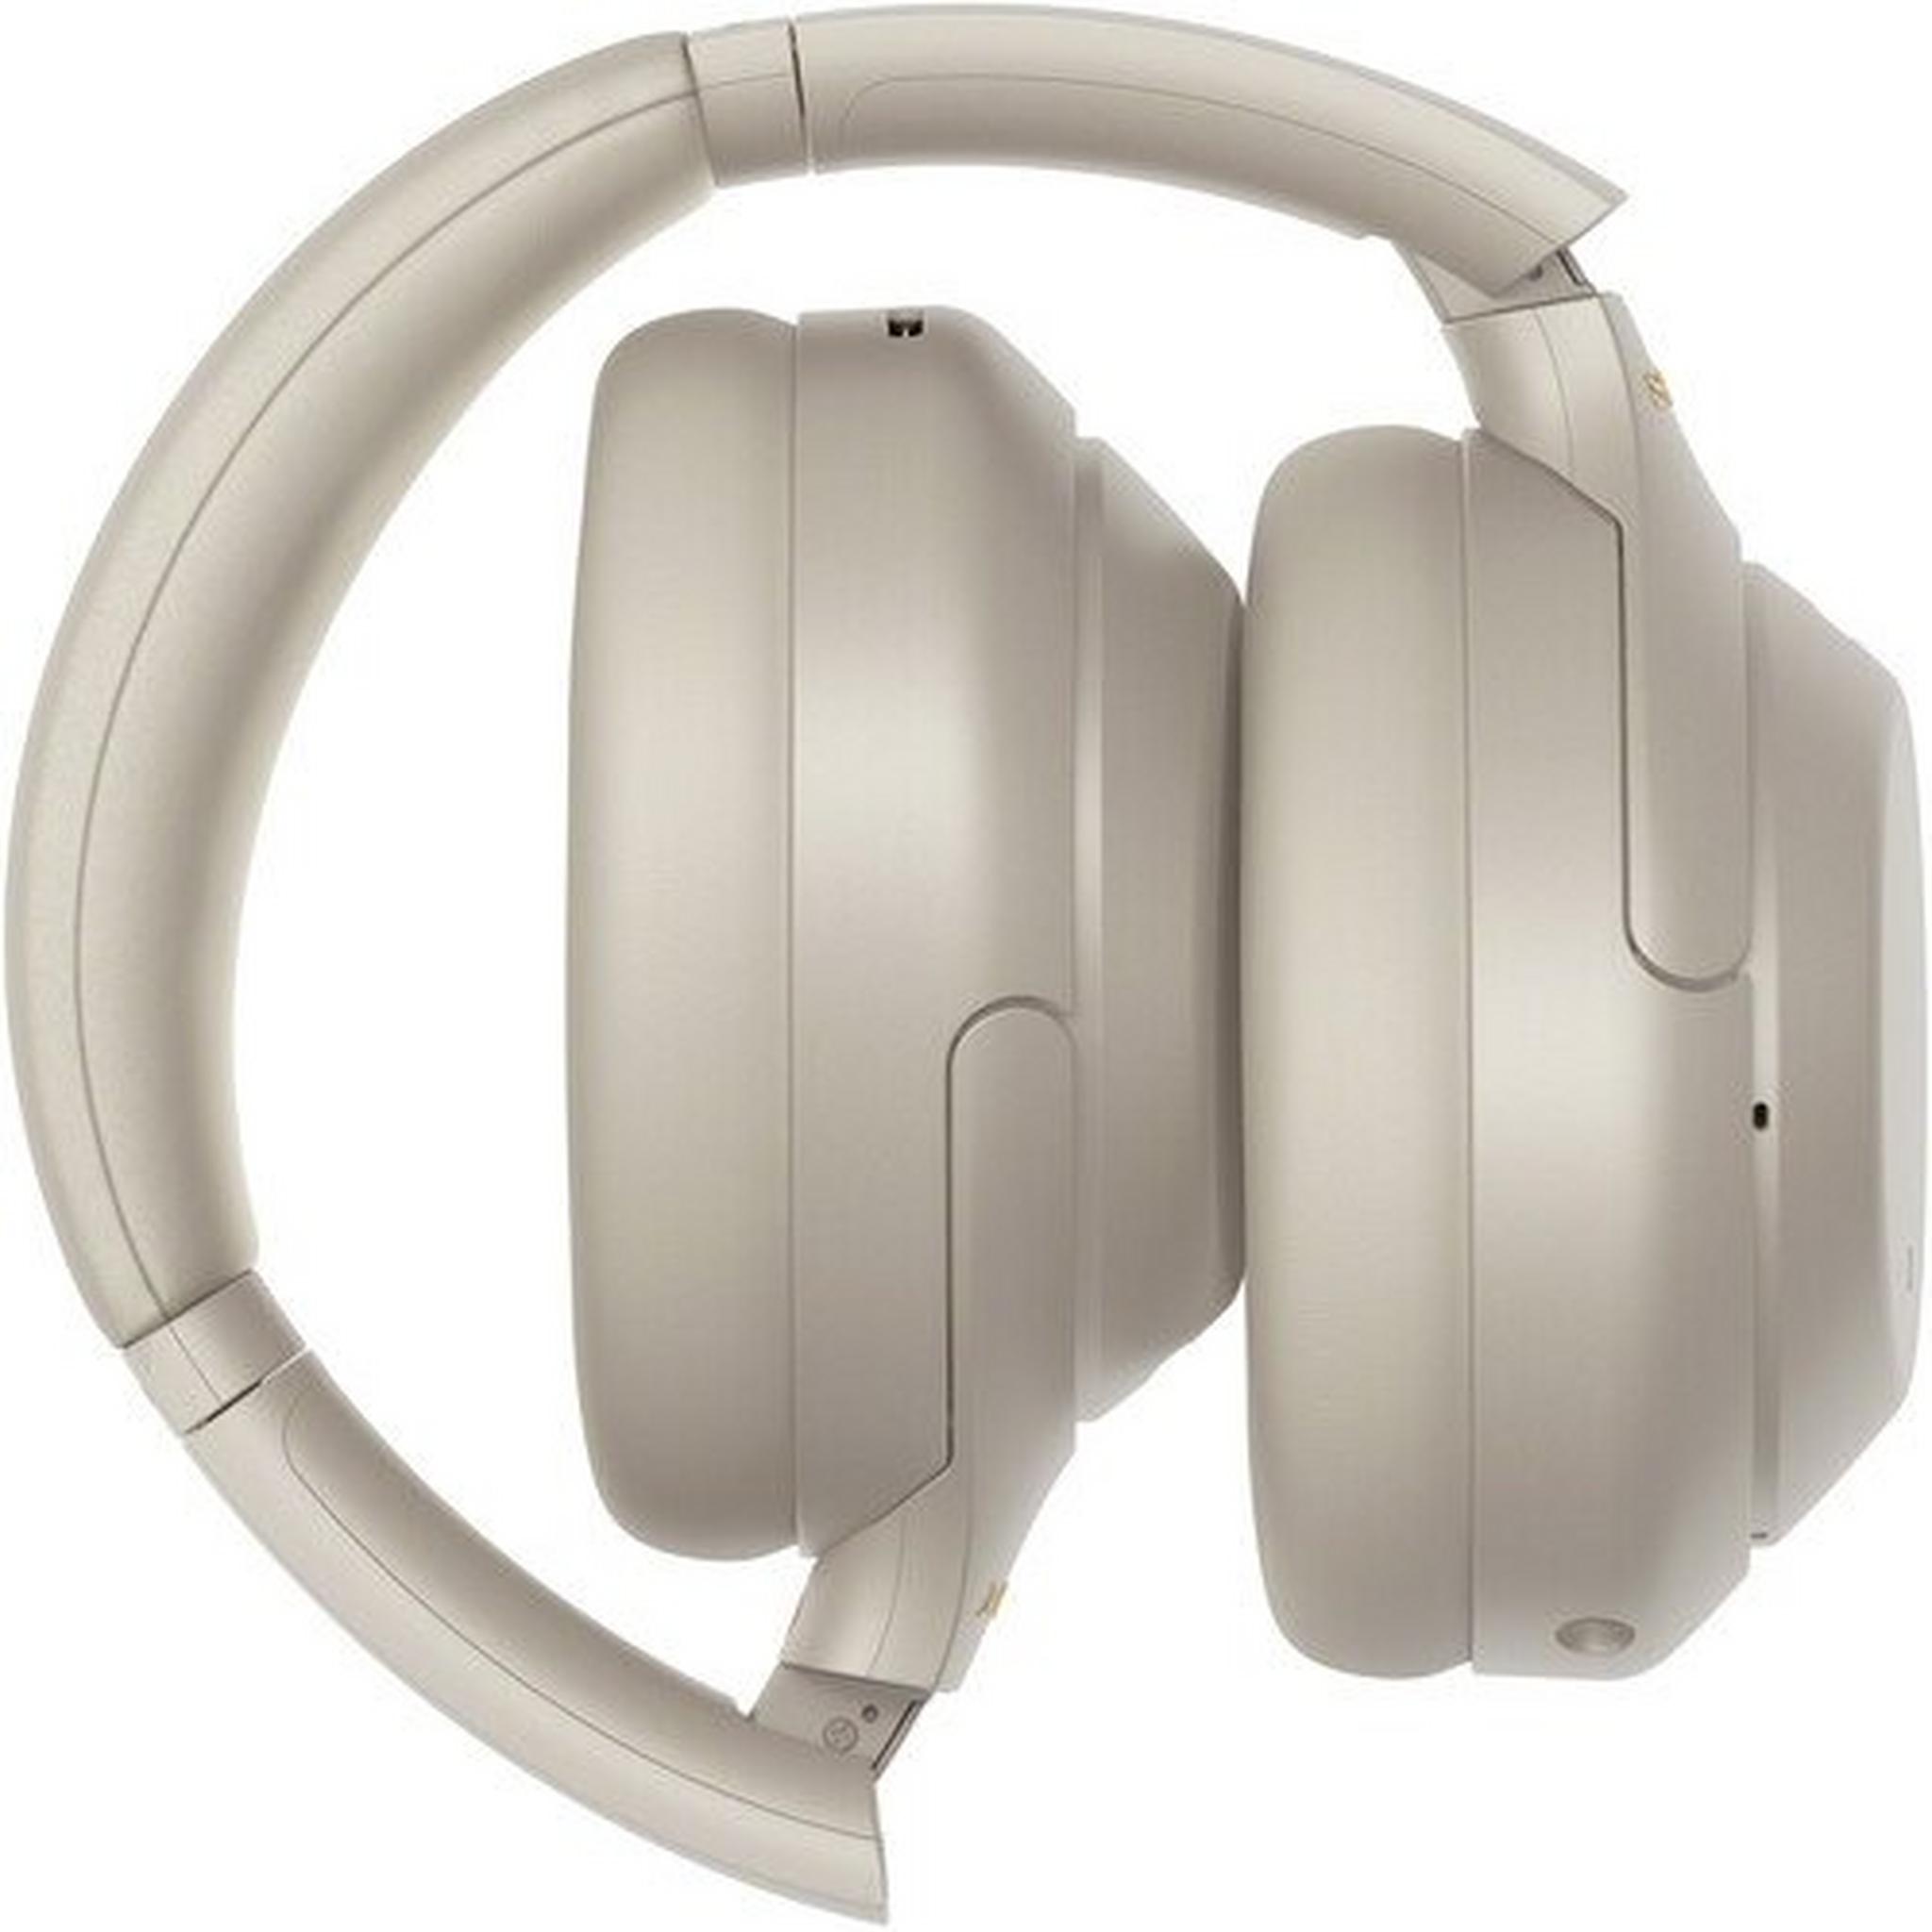 Sony Wireless Noise Canceling Over-Ear Headphone (WH-1000XM4/SME) - Silver